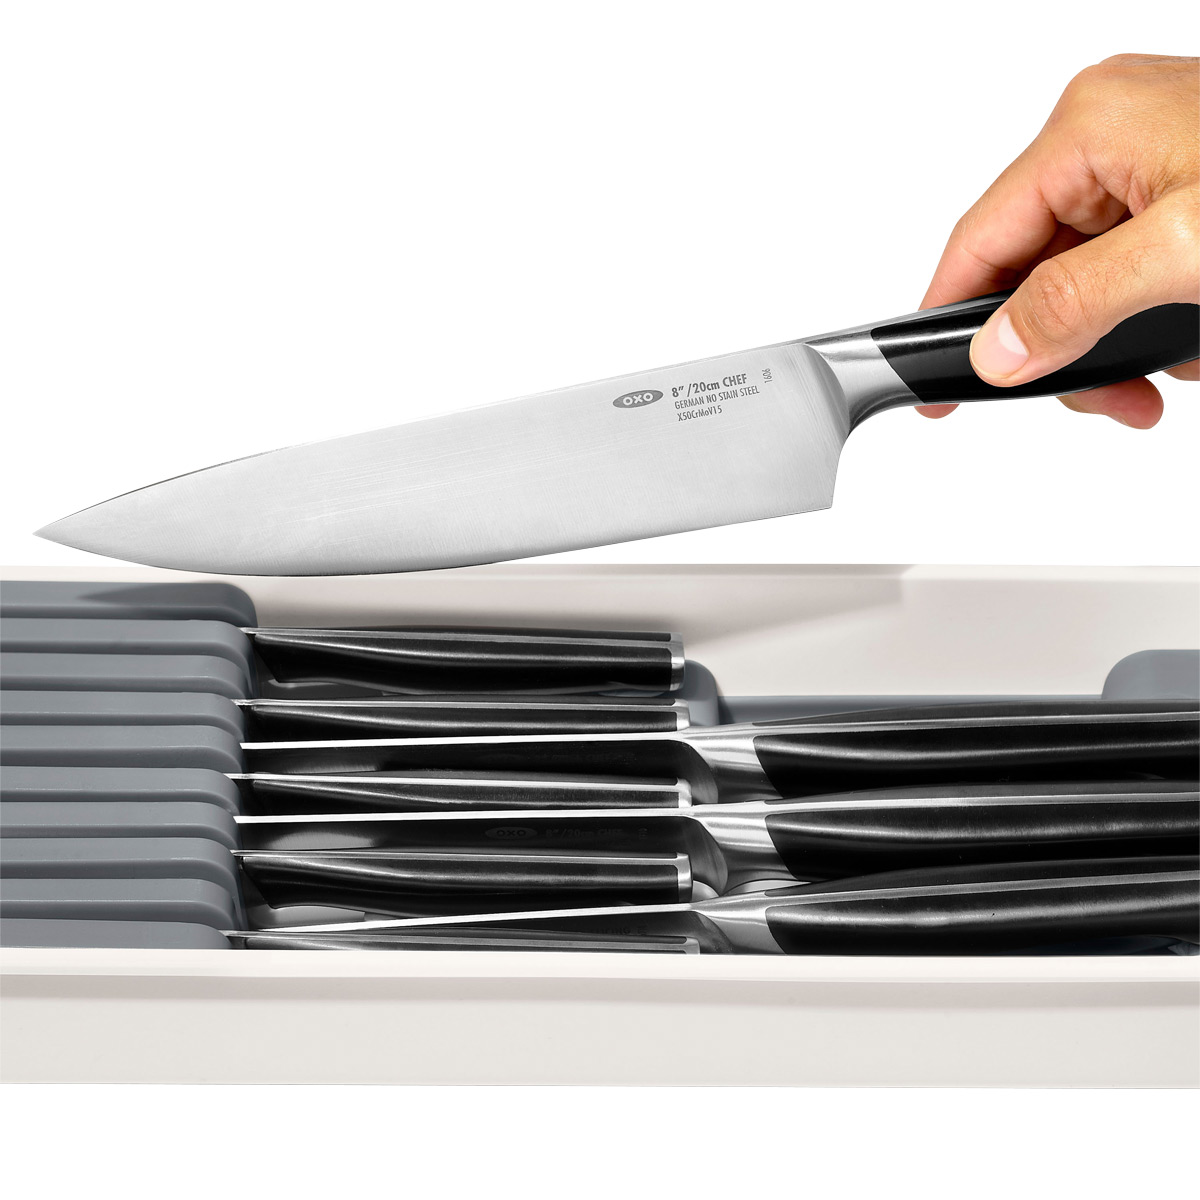 https://www.containerstore.com/catalogimages/443018/10088250-OXO-Good-Grips--Knife-Drawe.jpg